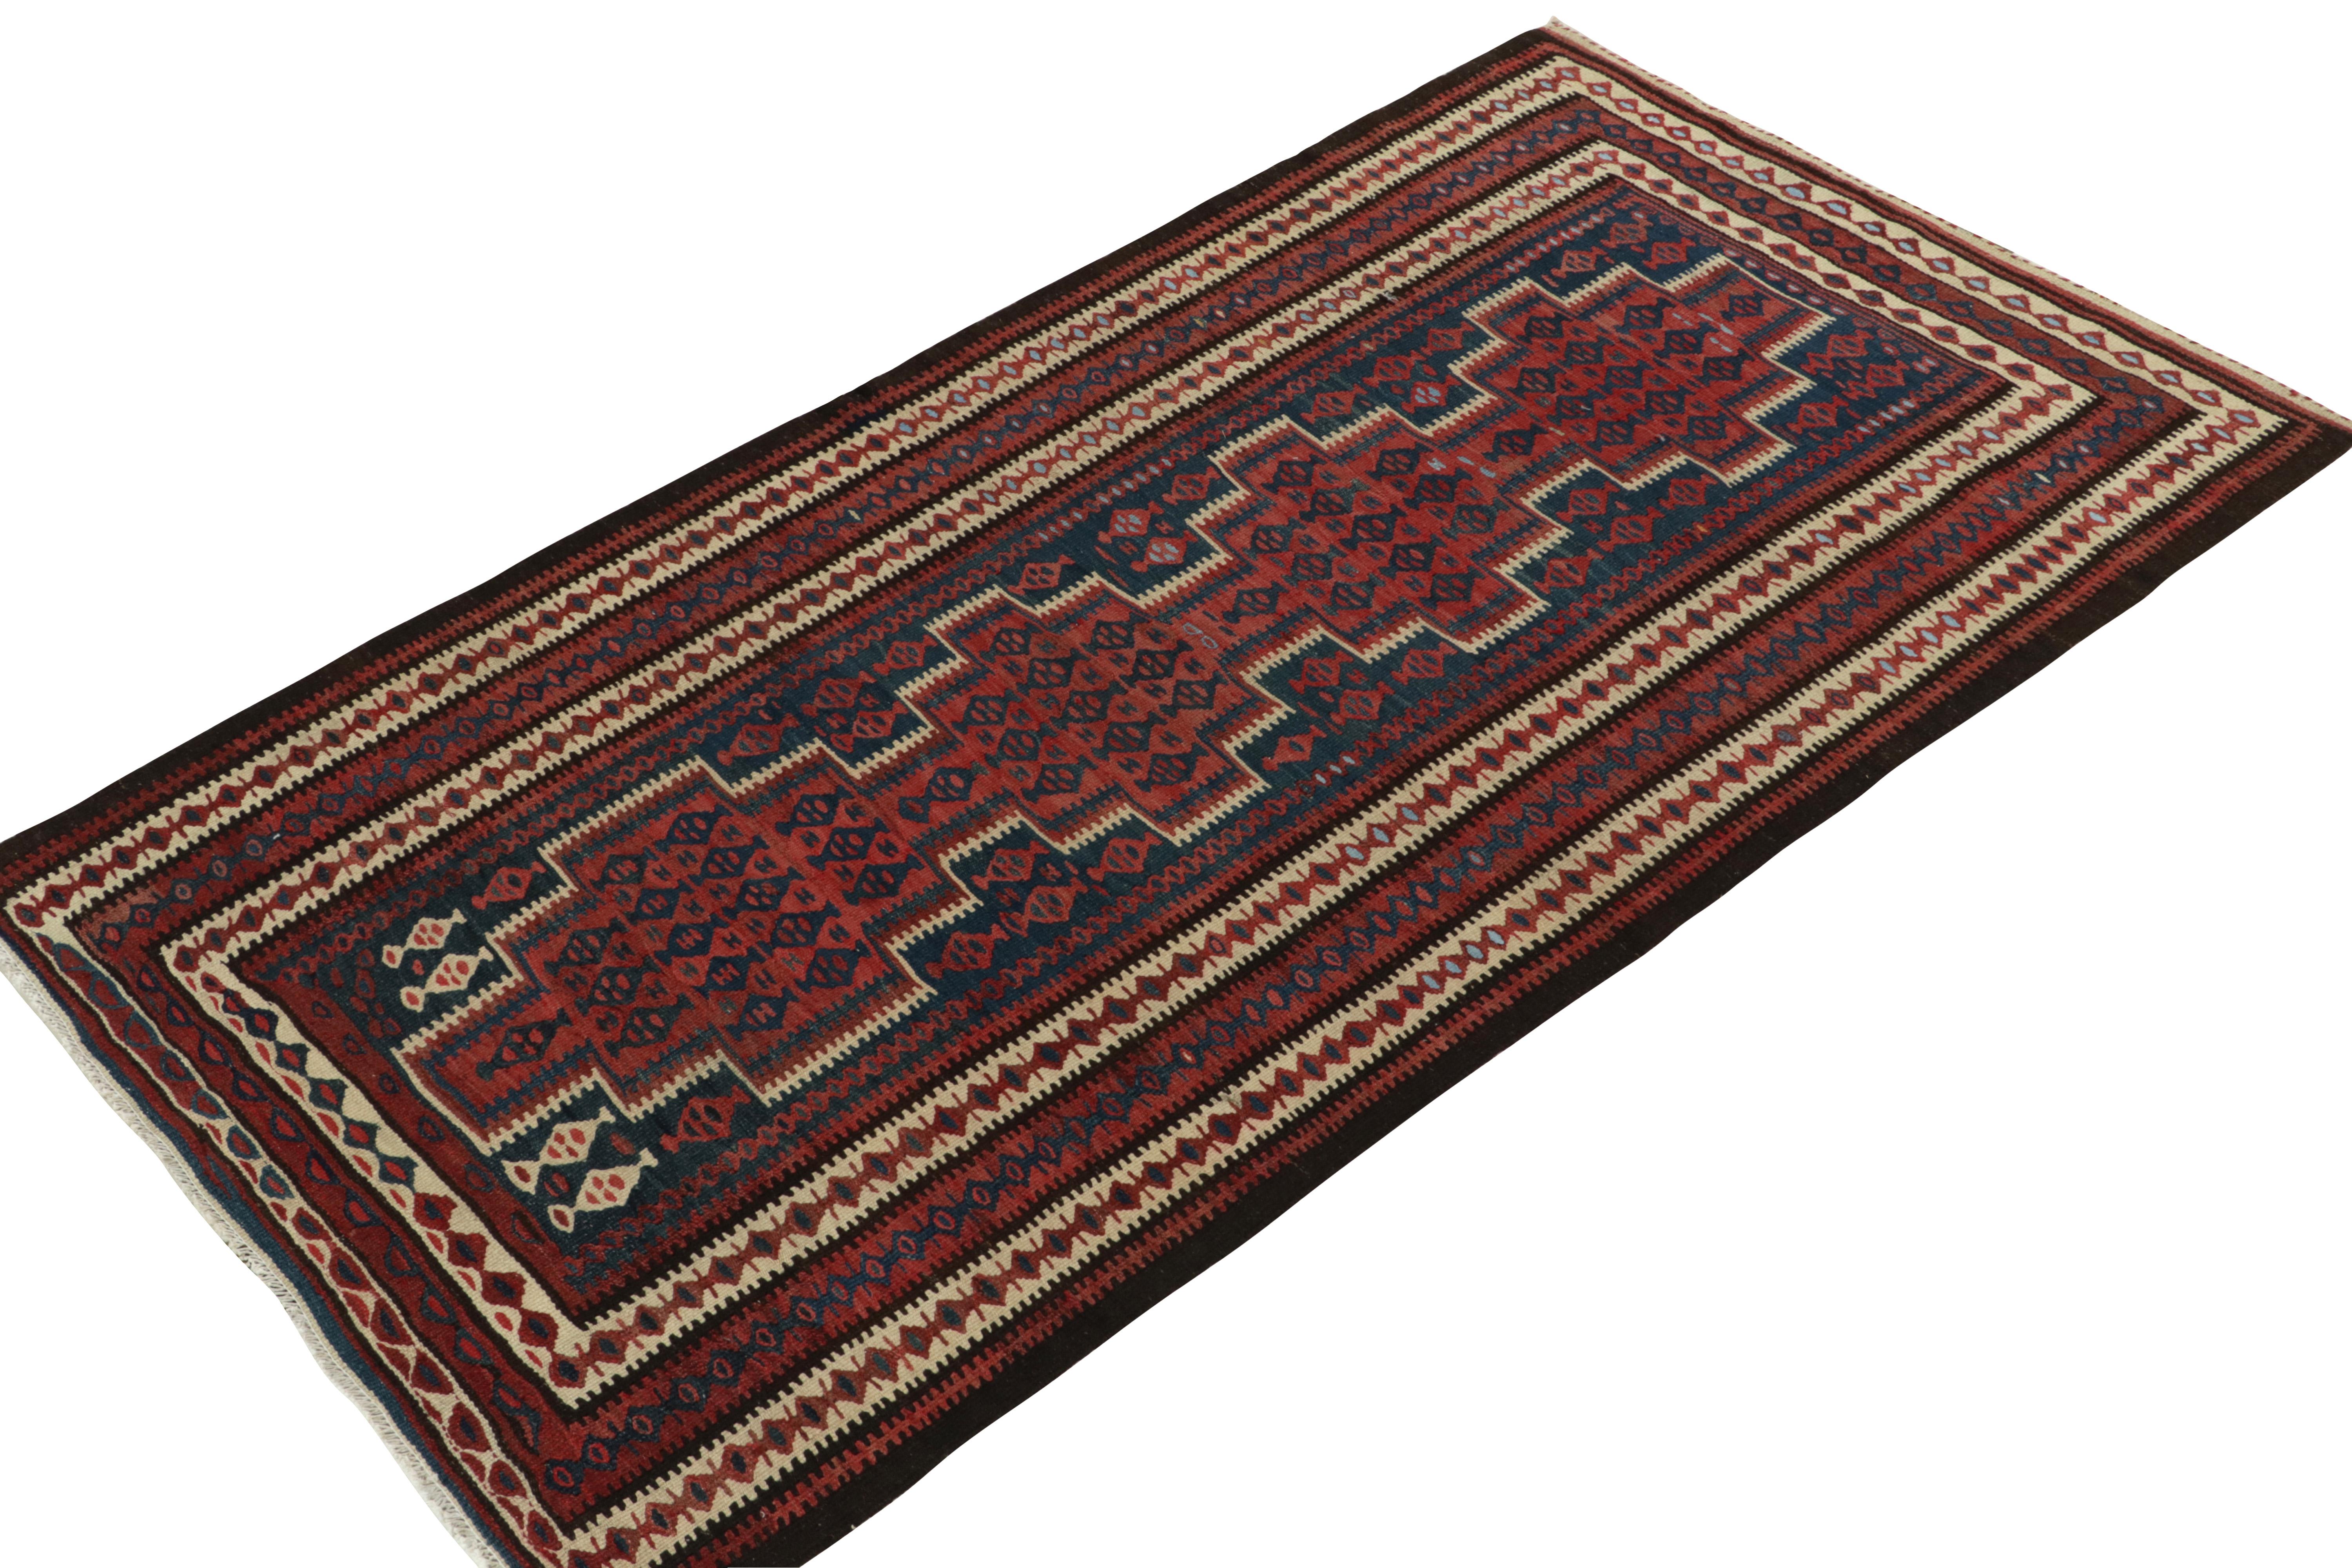 Originating from Turkey circa 1950-1960, a mid-century kilim rug enjoying a meticulous all over pattern. Featuring a well defined traditional pattern in red, blue & beige-brown with outstanding finesse, a 4x8 piece thriving in good condition well